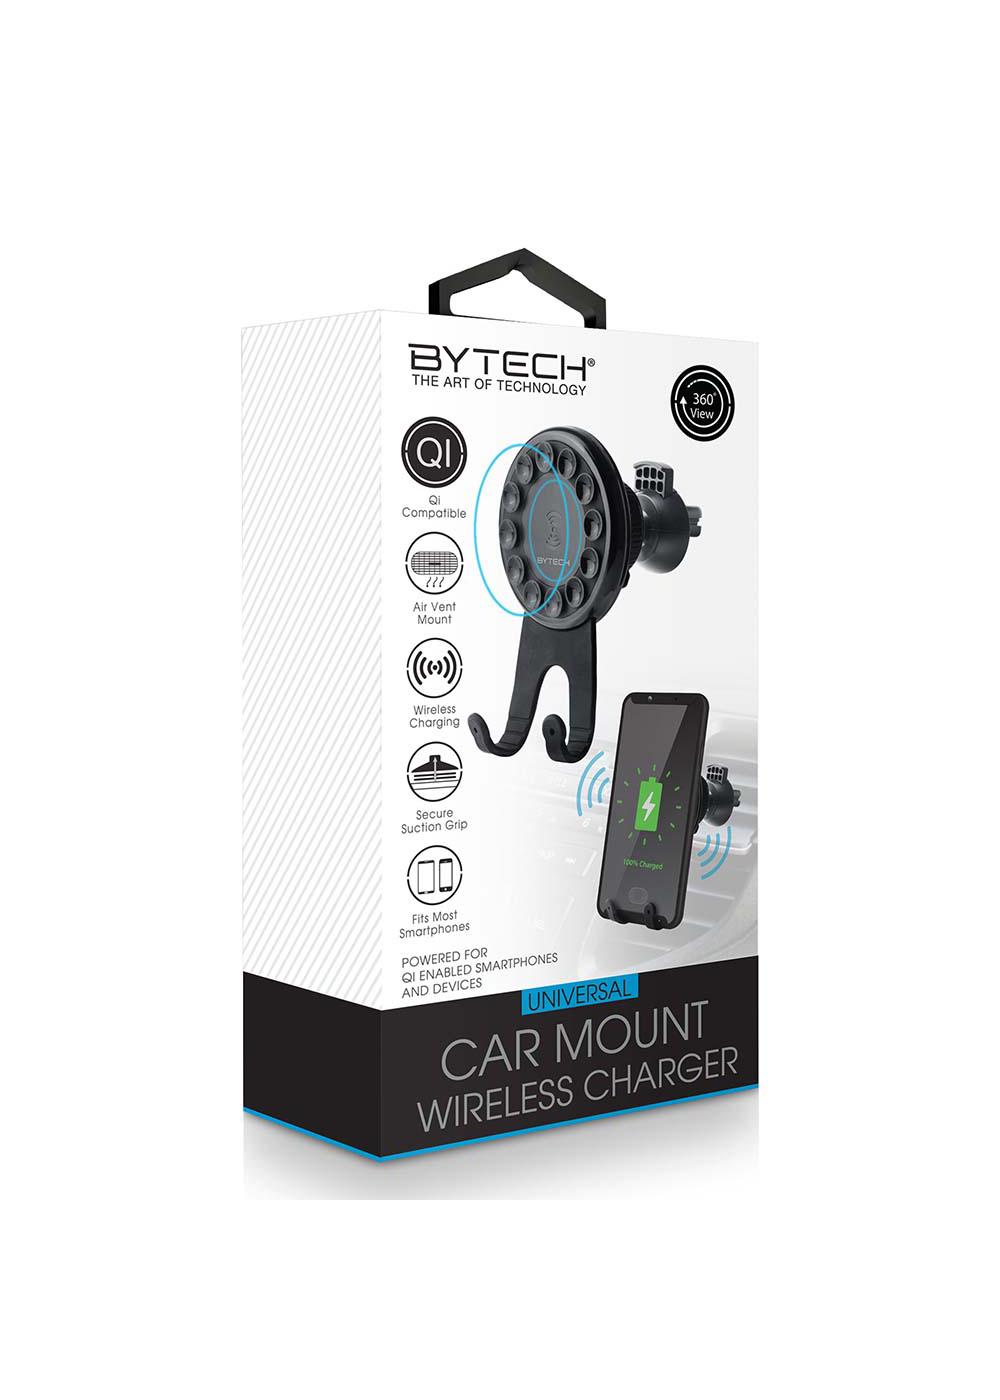 Bytech Wireless Charger Car Mount - Black; image 1 of 2